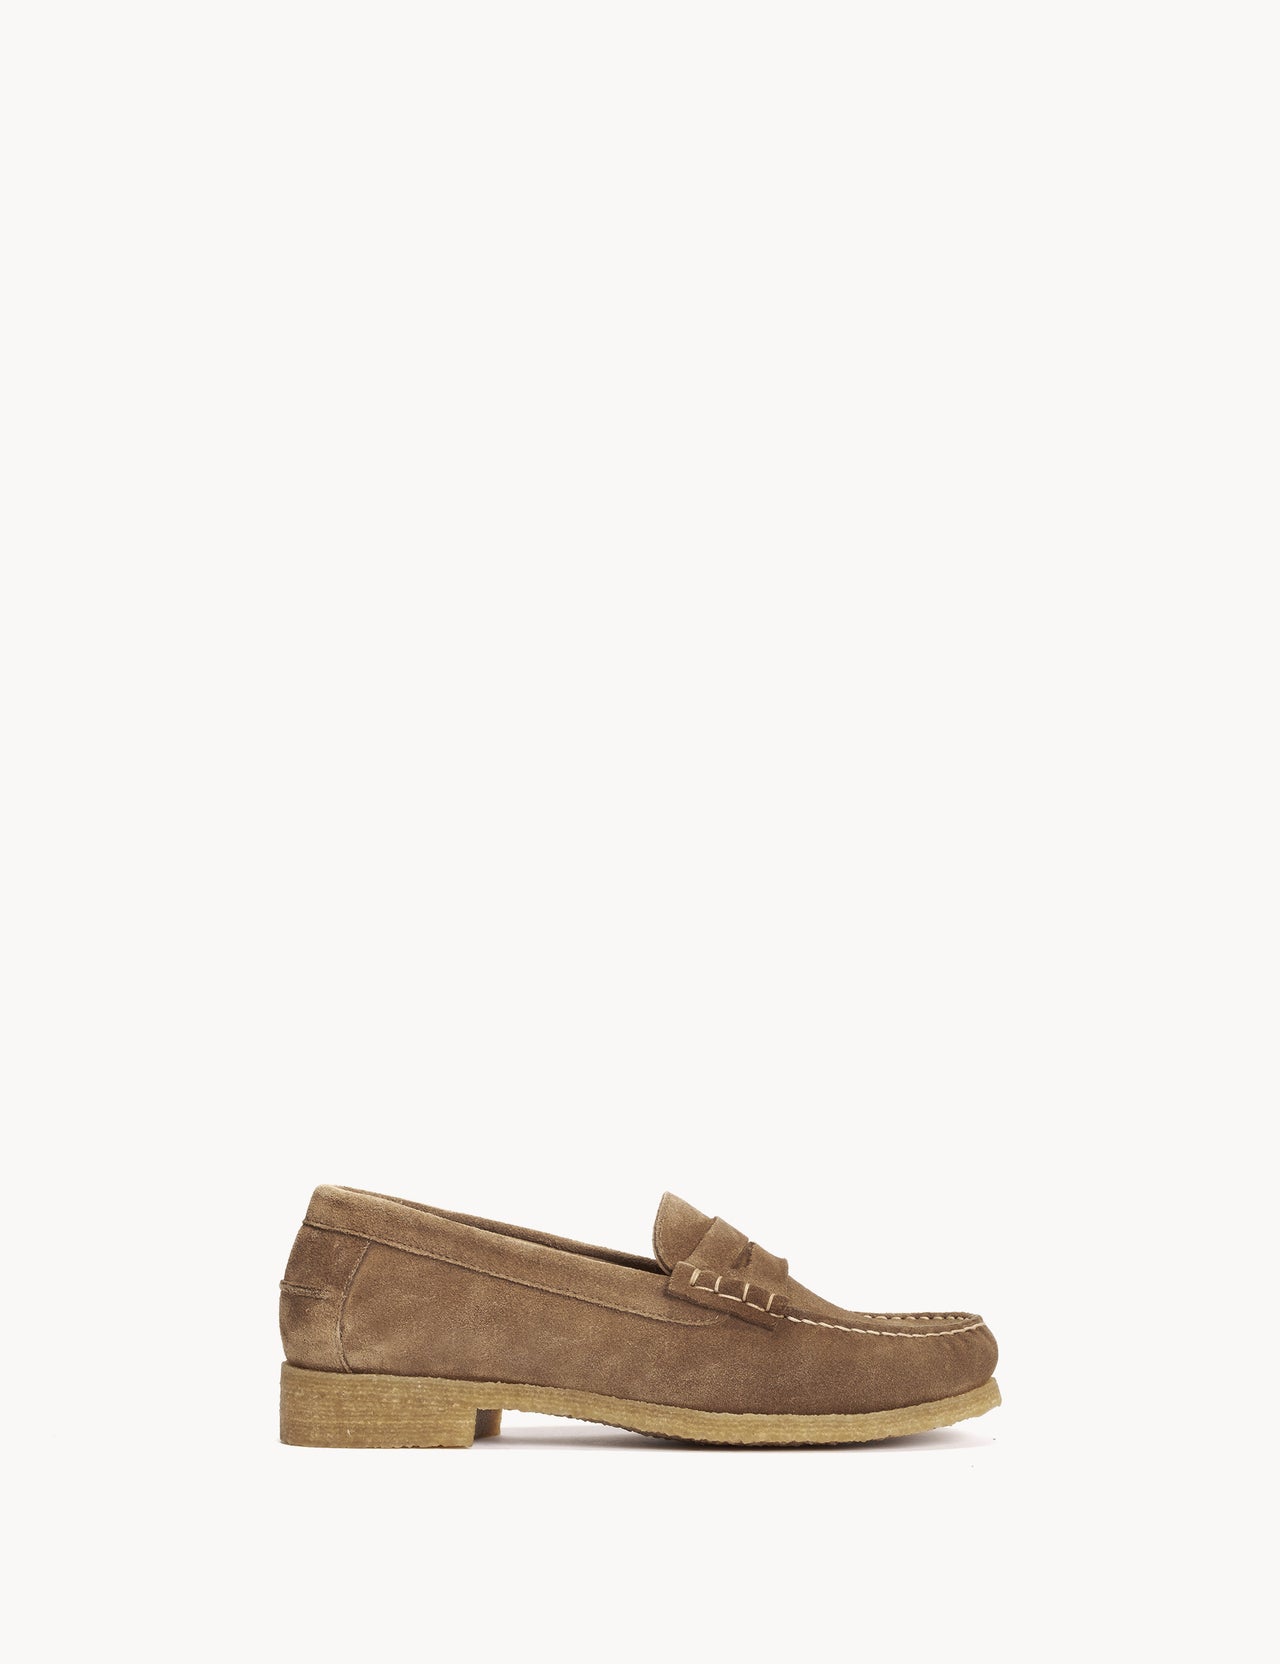 Moccasin Penny Loafer In Honey Calf Suede With A Crepe Sole